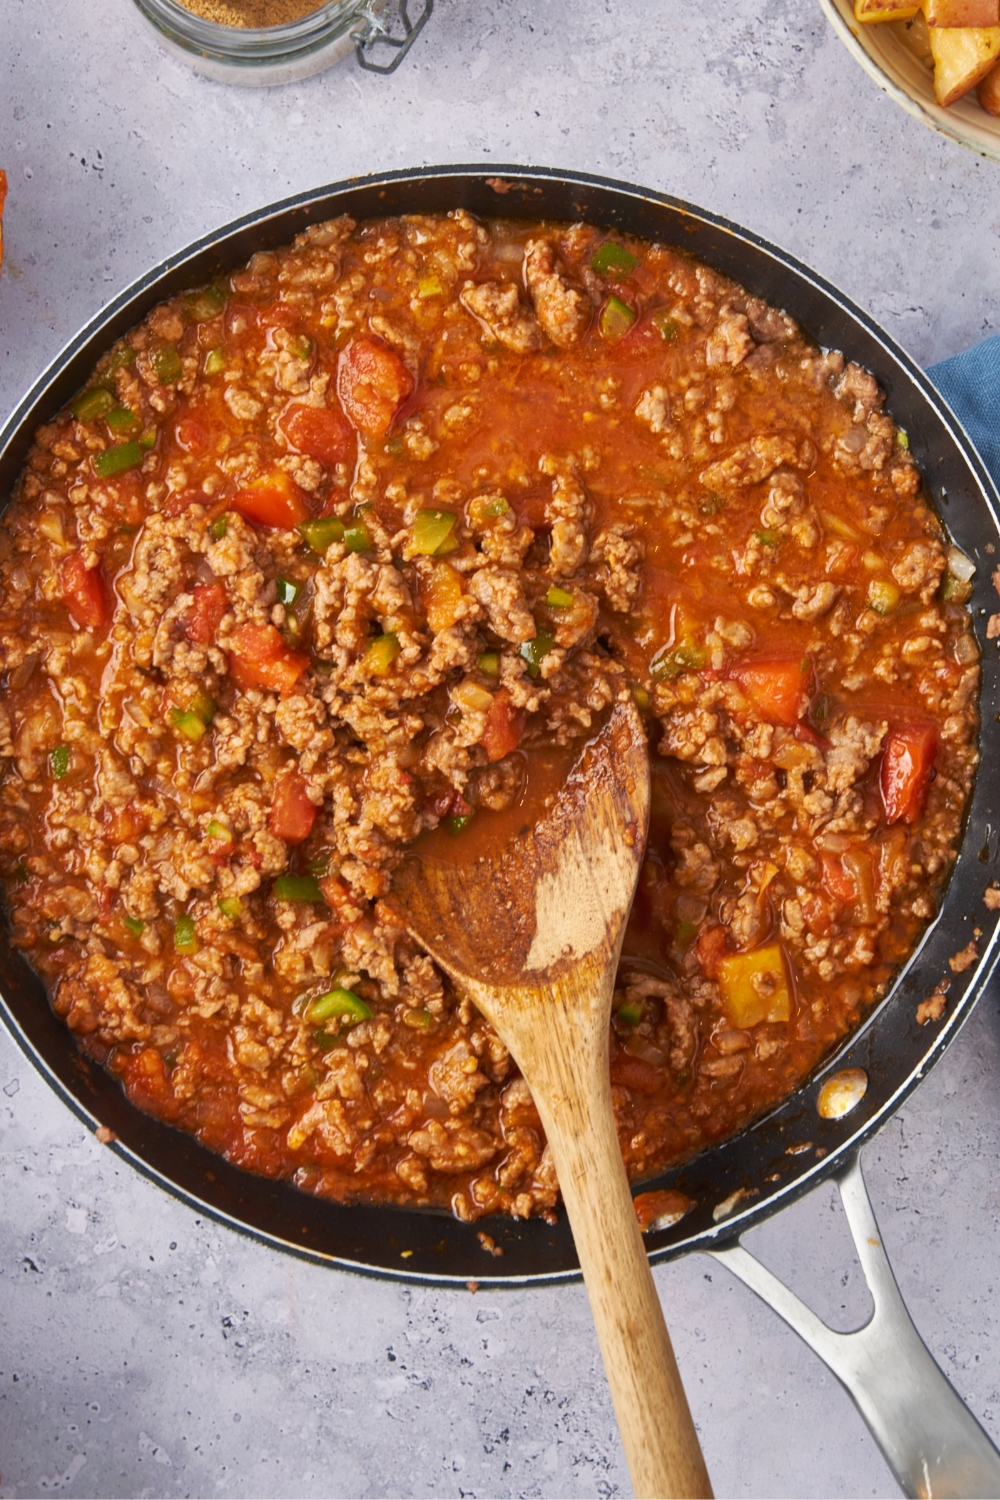 A large skillet with the ground beef mixture cooking with tomato sauce and diced tomatoes.